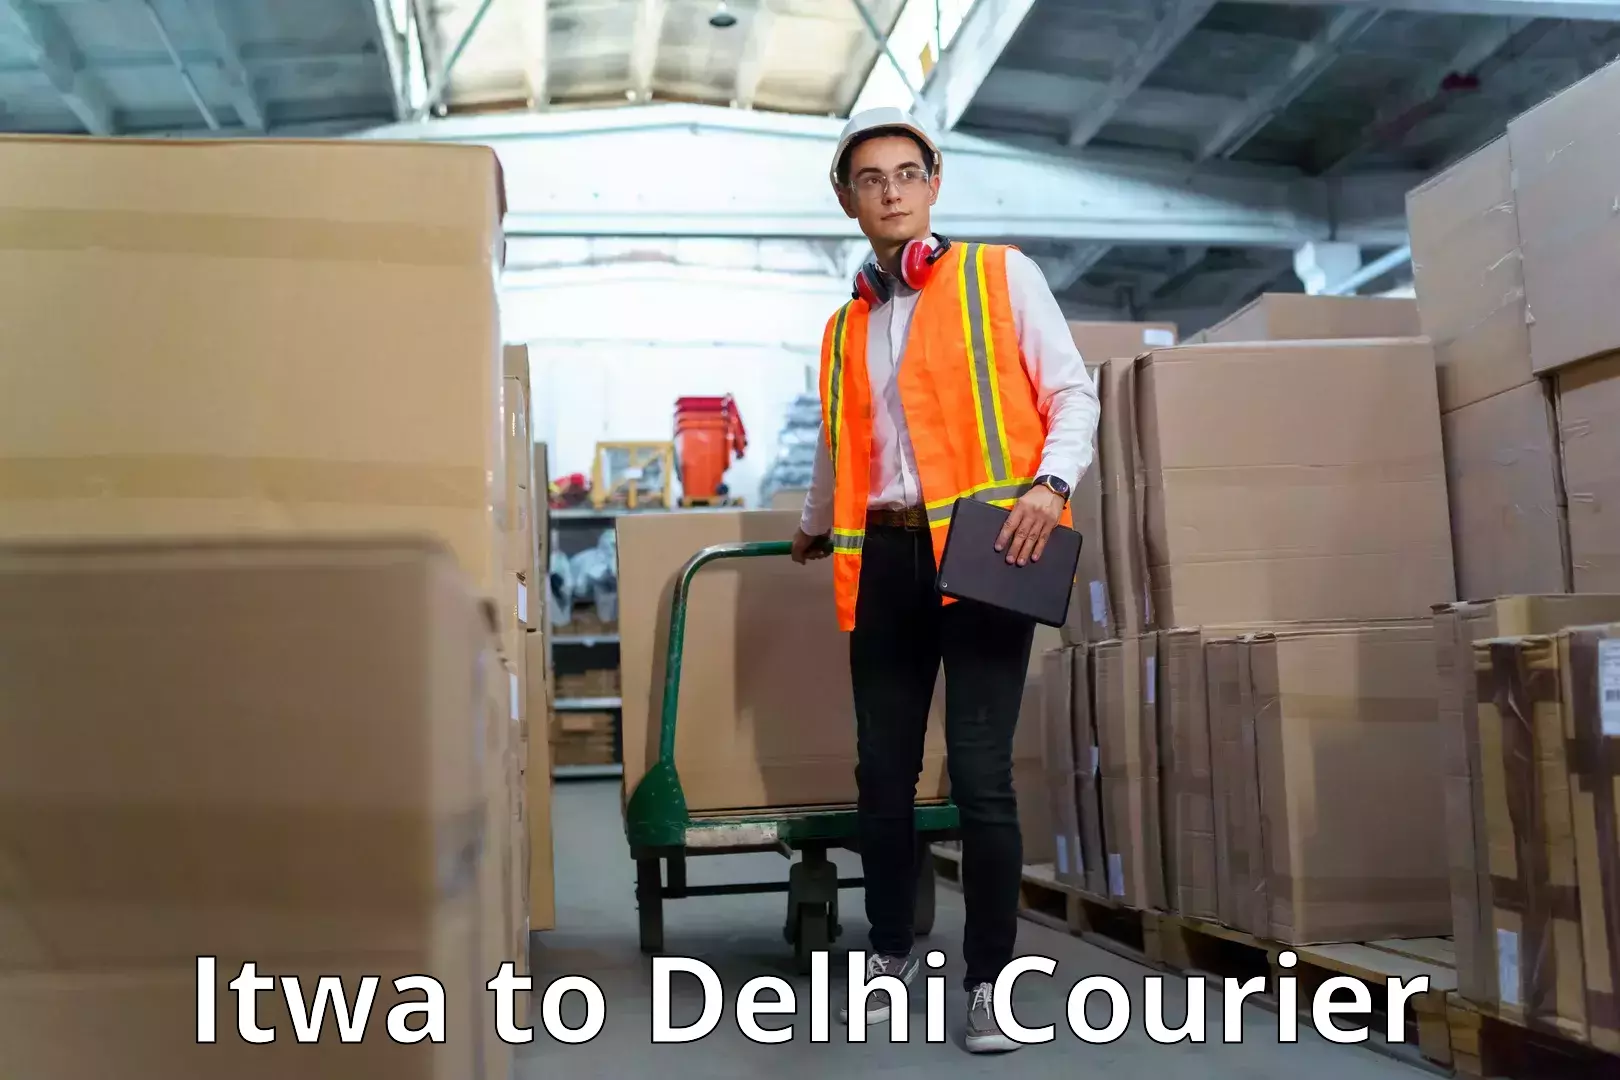 Customer-centric shipping Itwa to NCR